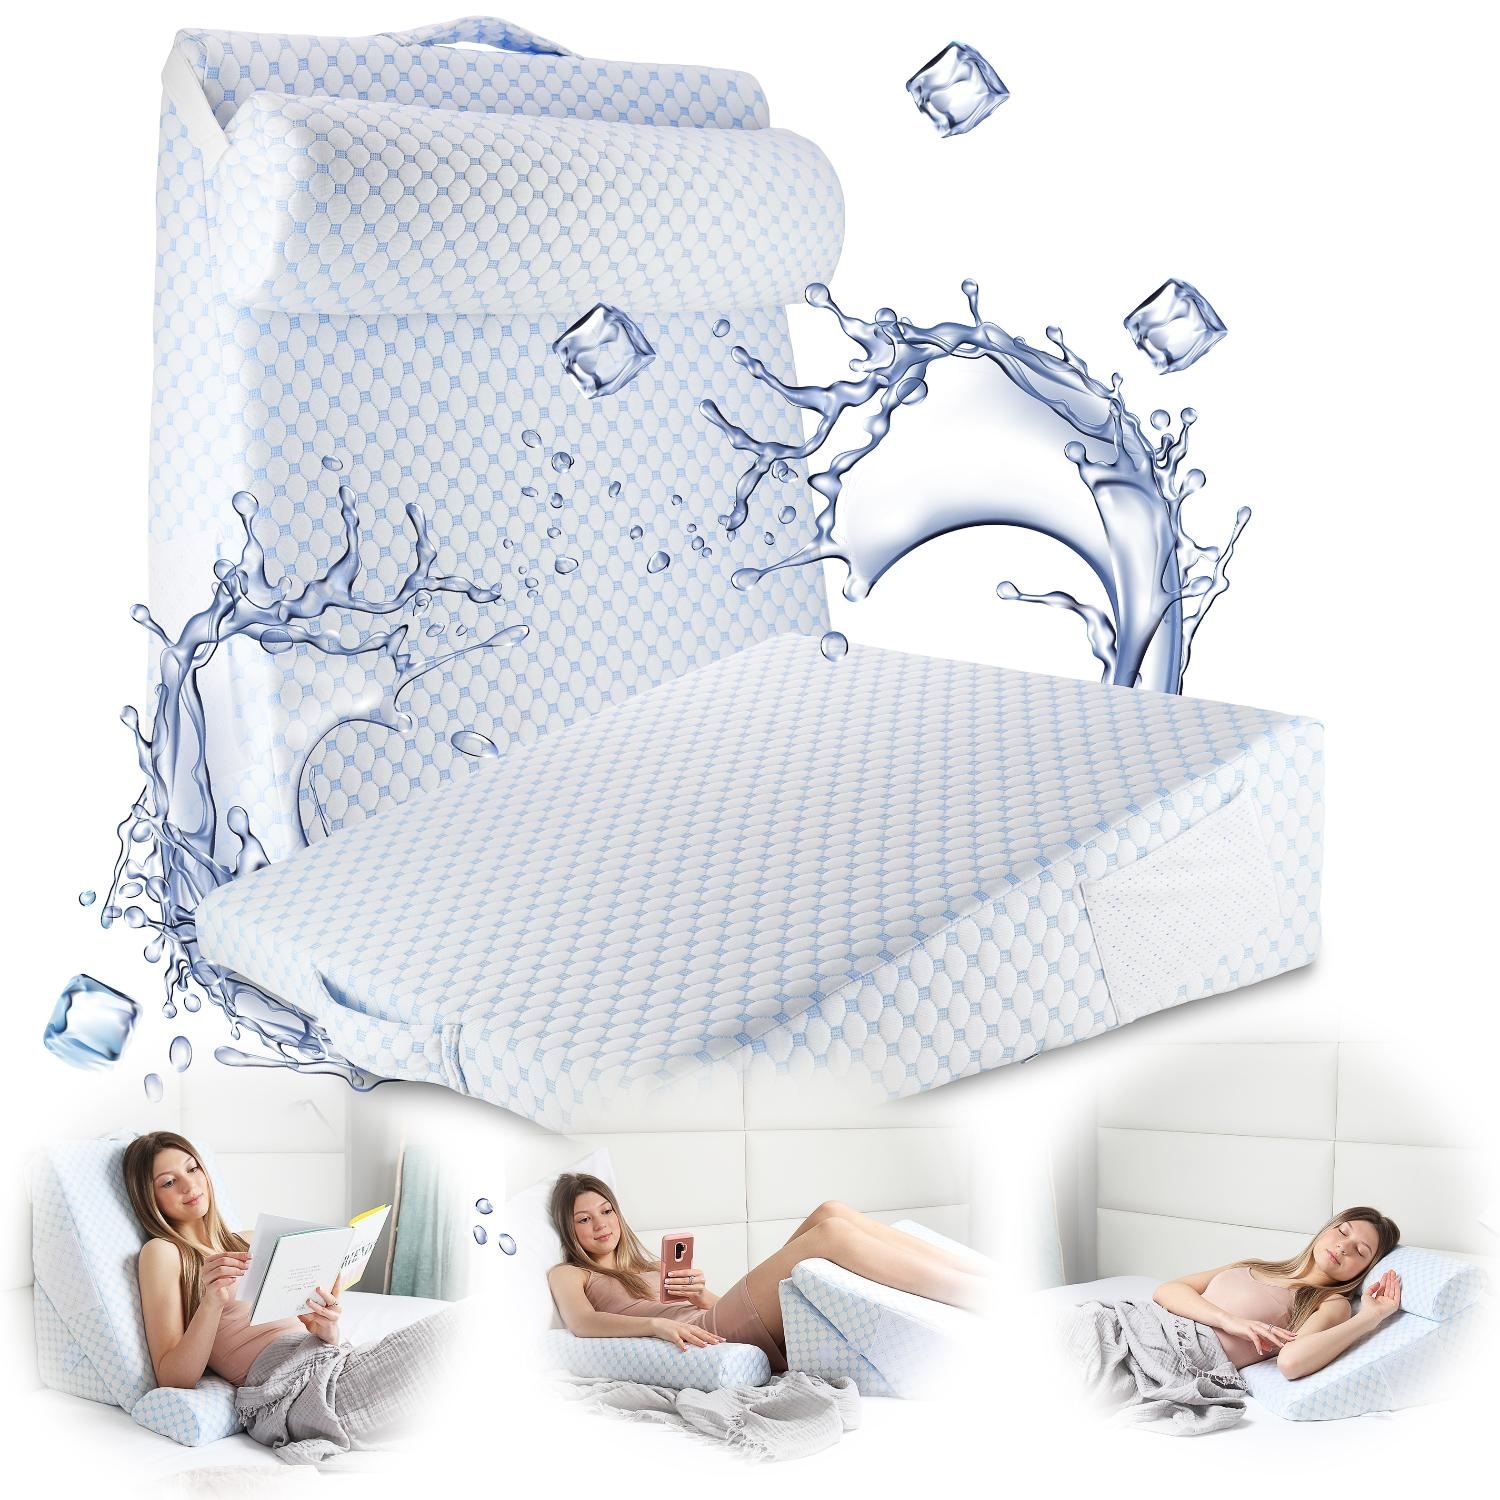 https://ak1.ostkcdn.com/images/products/is/images/direct/85f3edef8463516f7e475c16a0138c04eb5132be/Nestl-Cooling-Bed-Wedge-Pillow-with-Bolster-Pillow---25%22-x-25%22-x-7%22---8-in-1-Triangle-Pillow-Wedge-for-Sleeping-Acid-Reflux.jpg